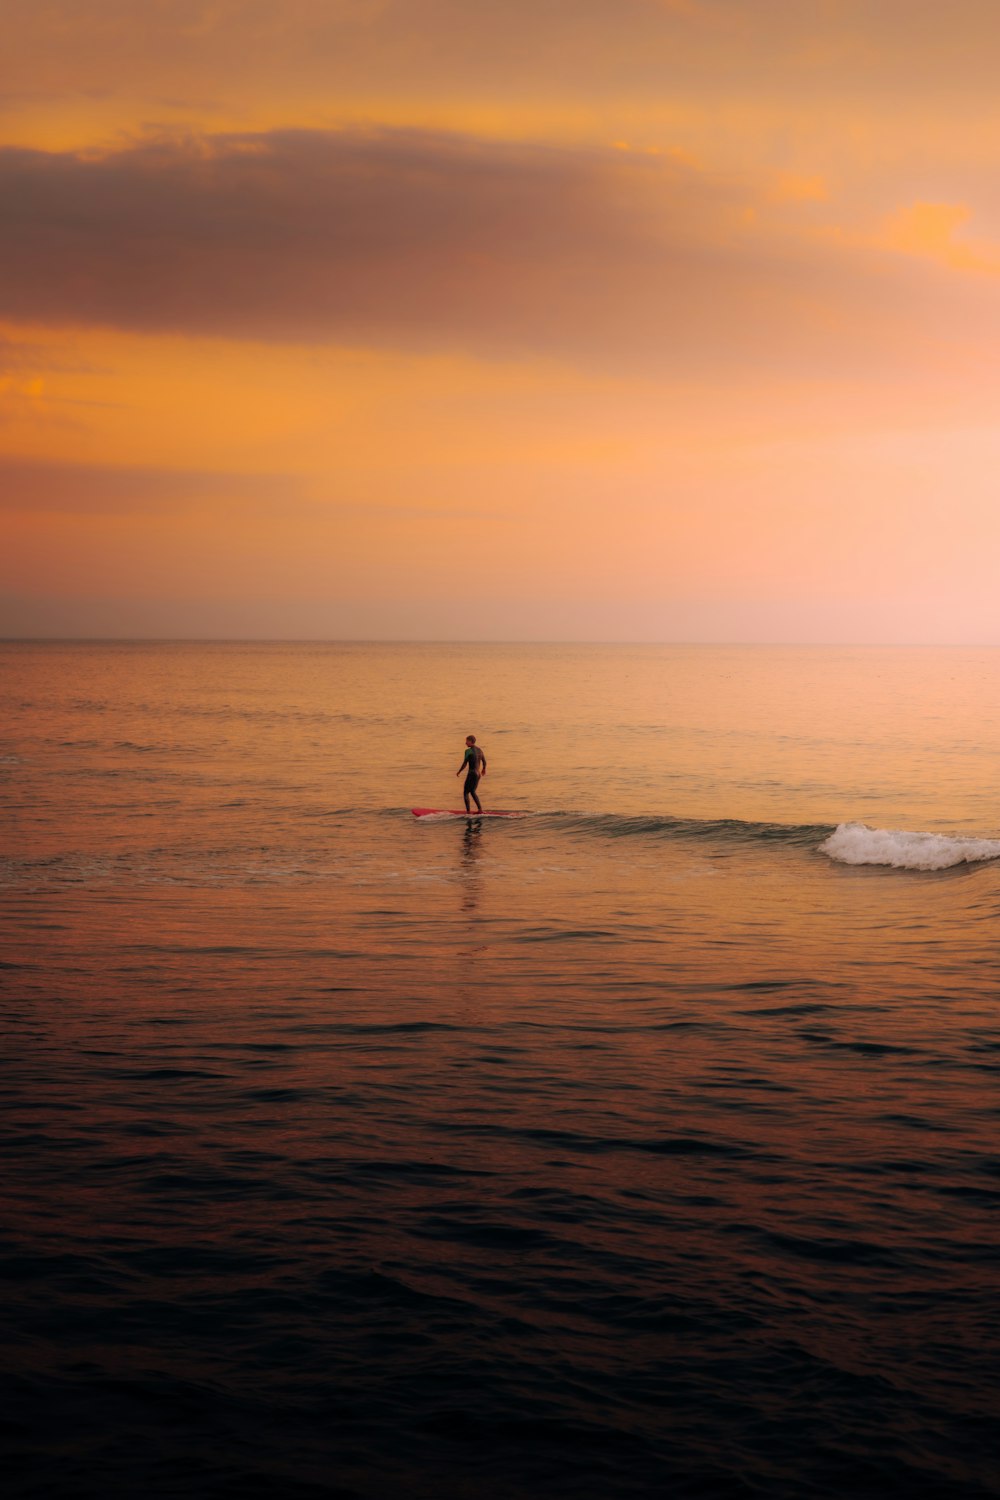 a person on a surfboard in the ocean